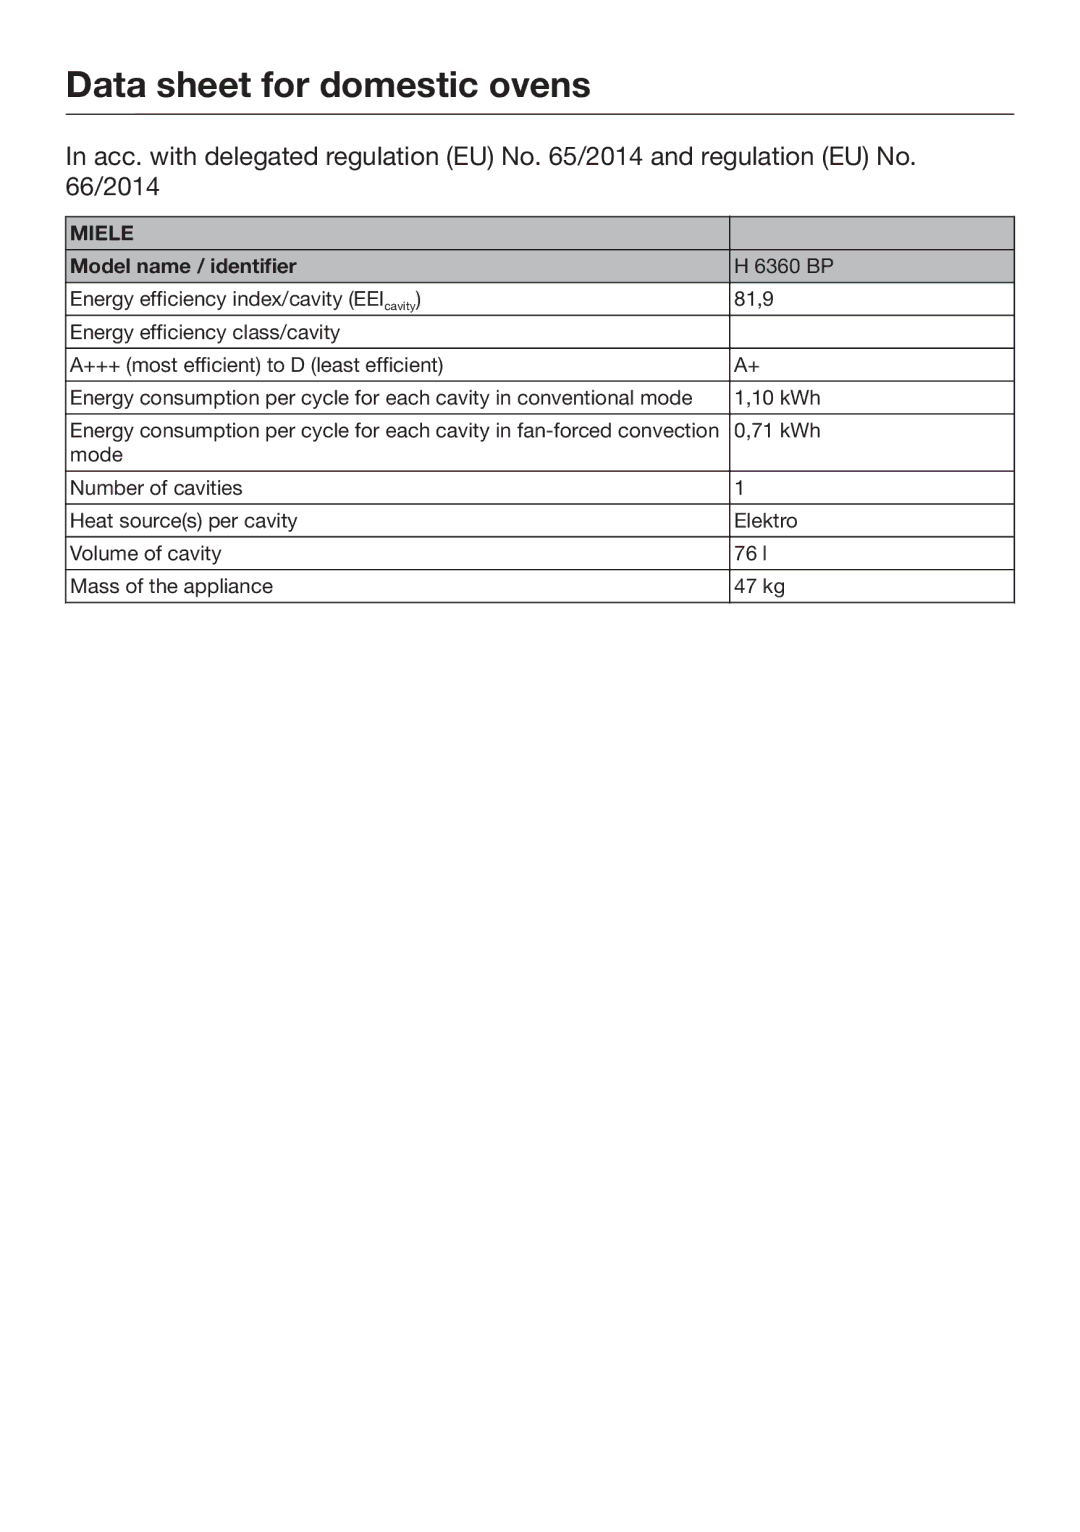 Miele 10 110 510 installation instructions Data sheet for domestic ovens, Miele 